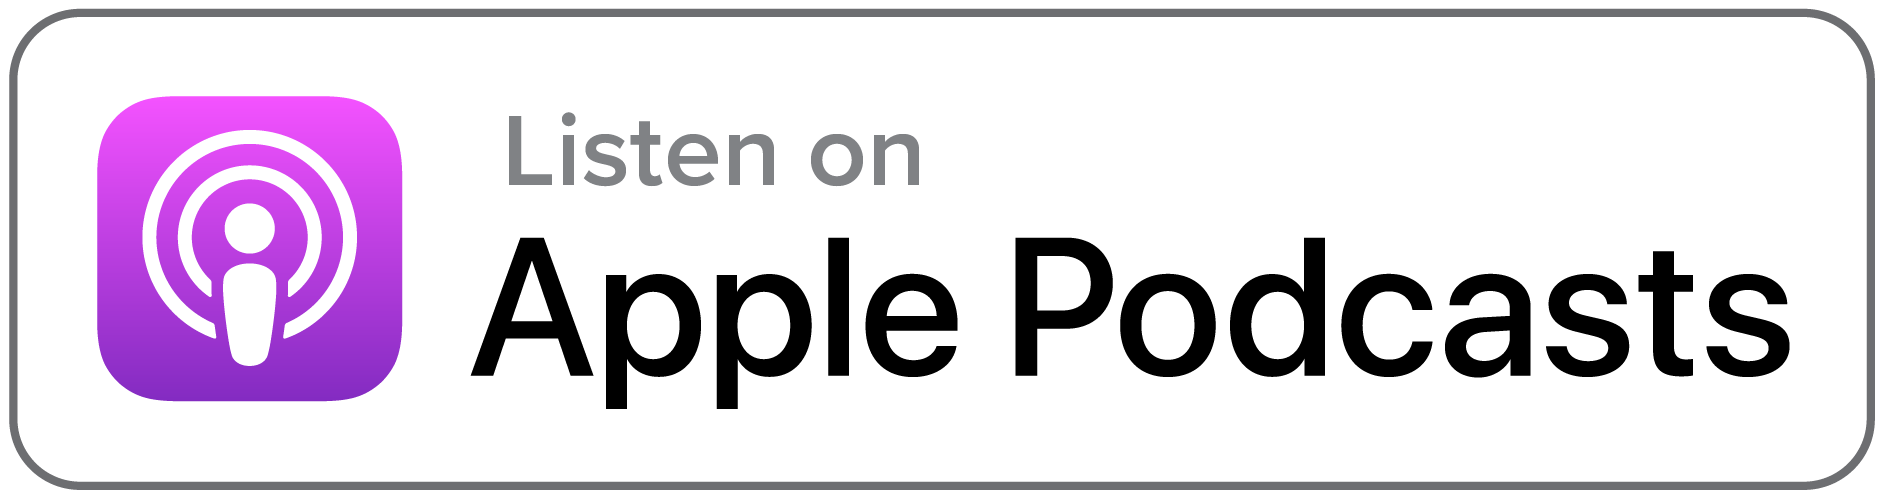 131-apple-podcasts-badge.png